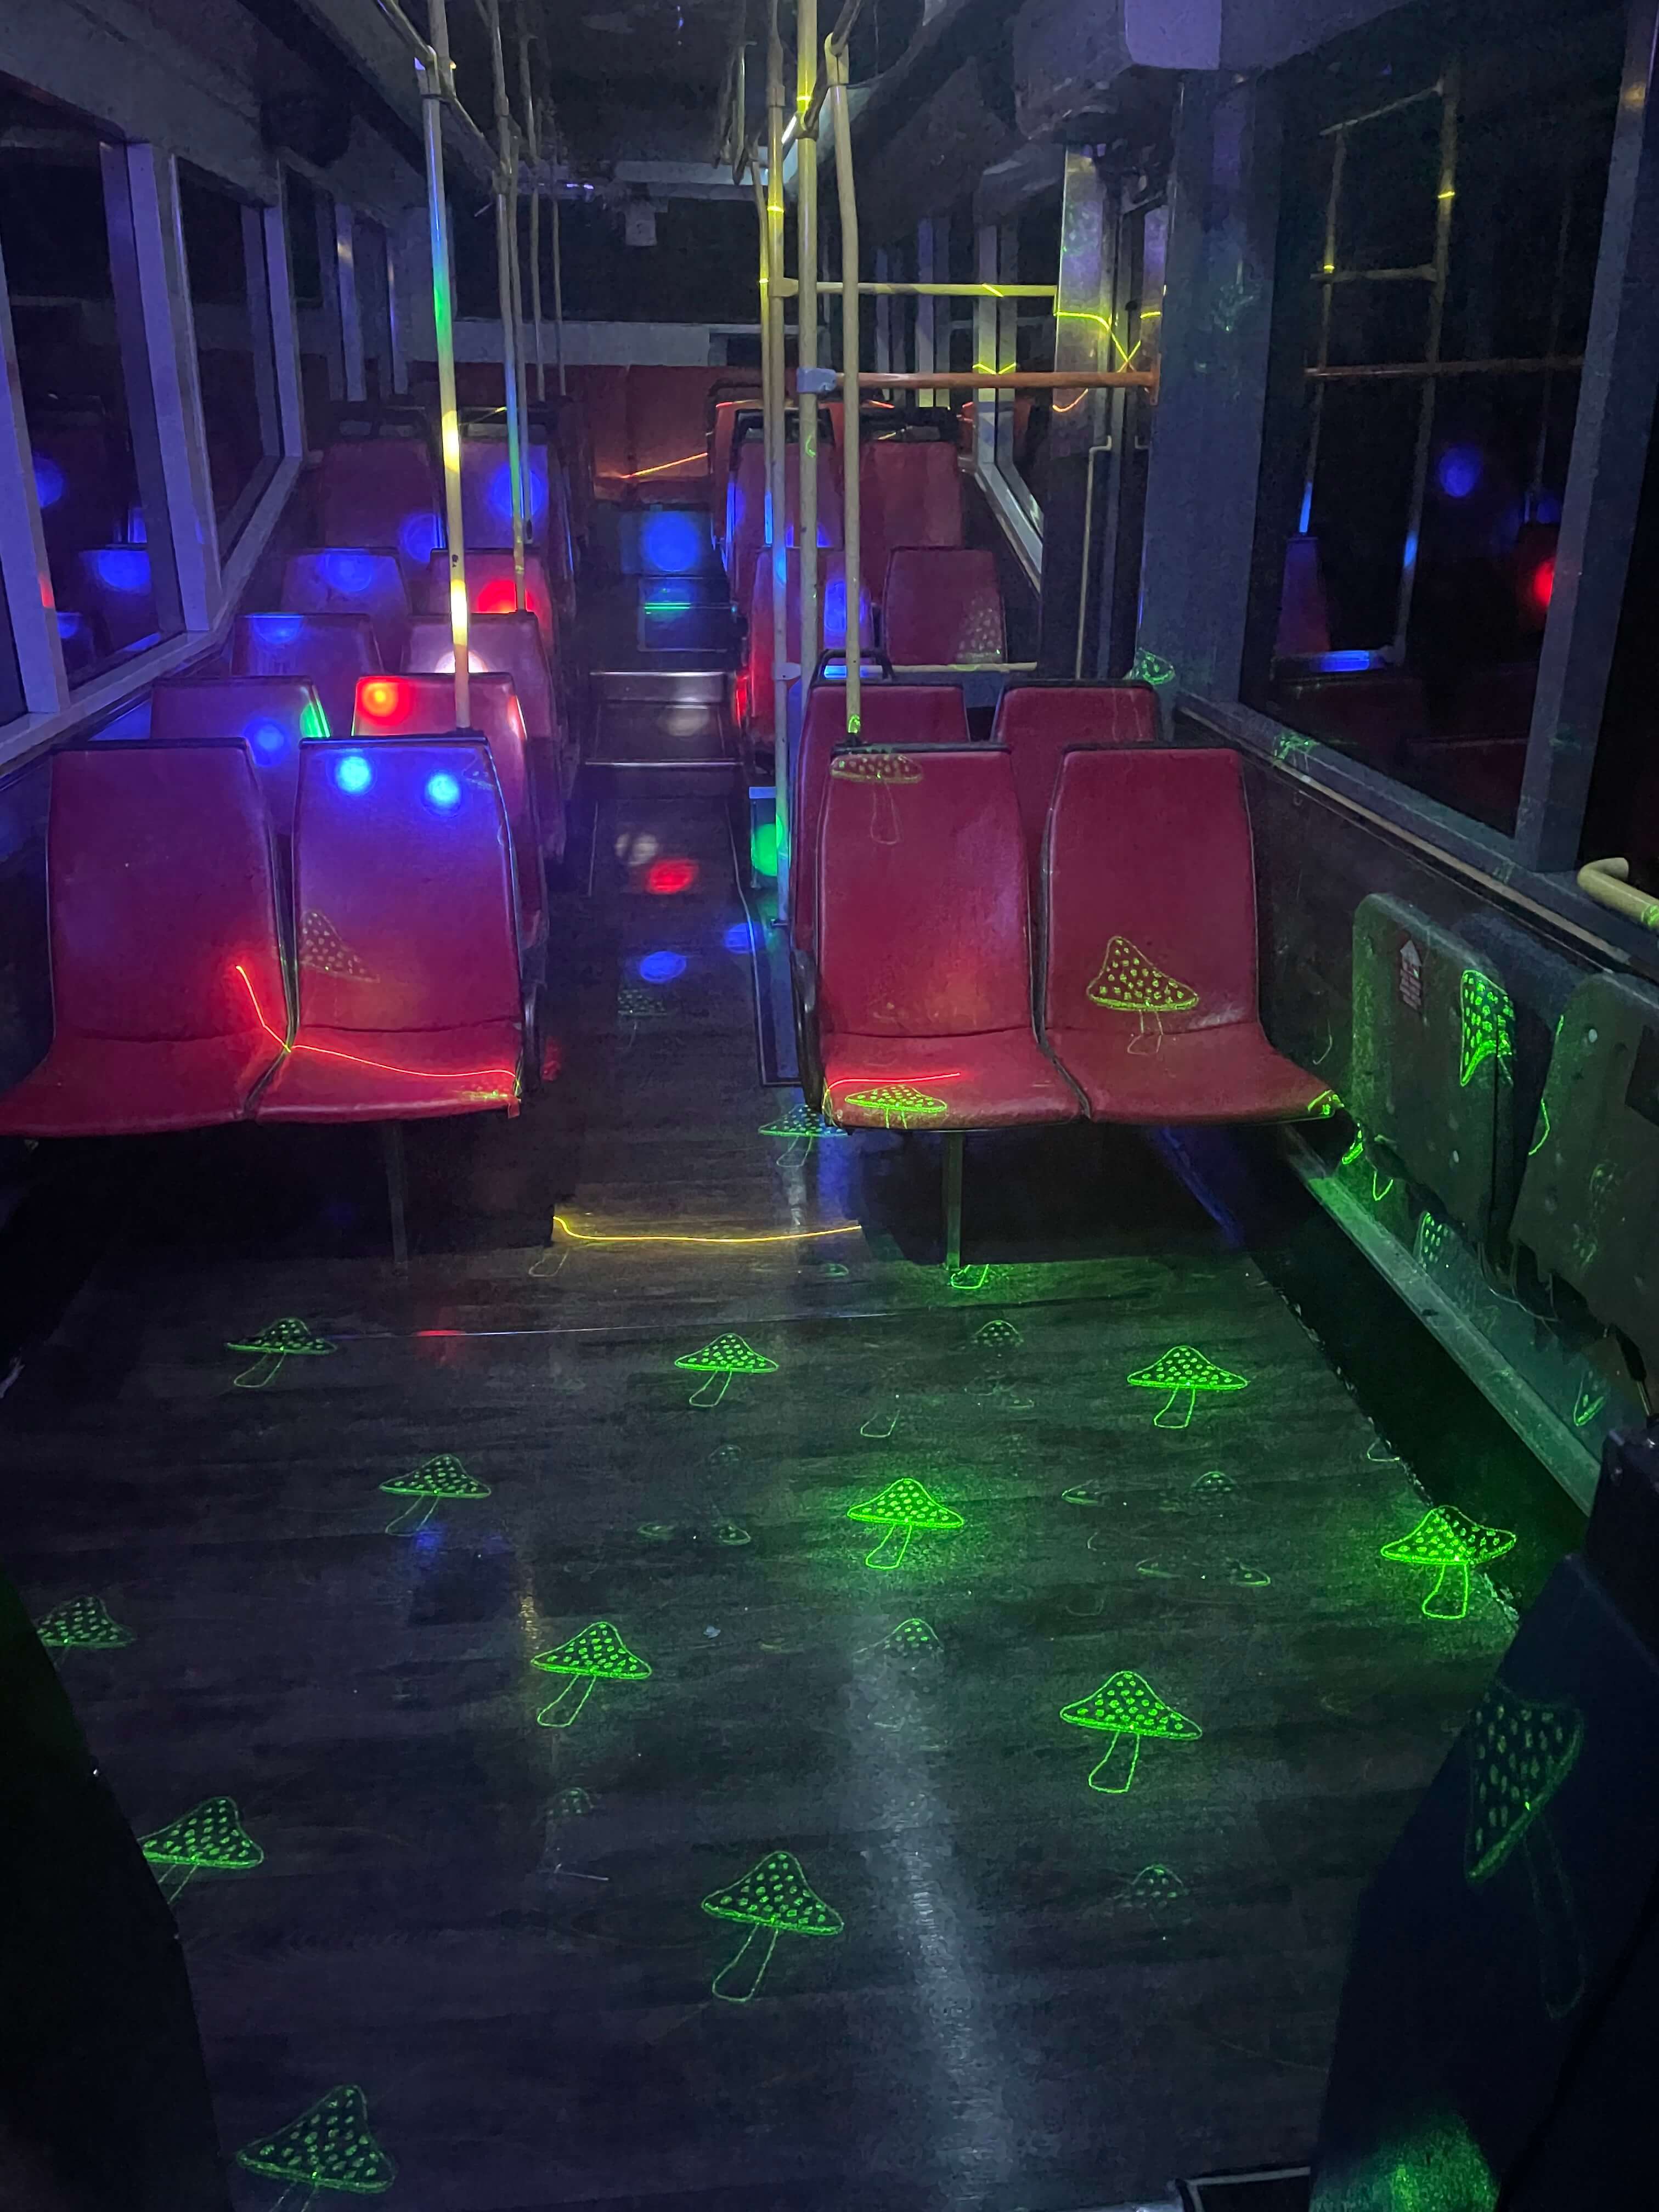 40-65 Seat / Standing Party Bus